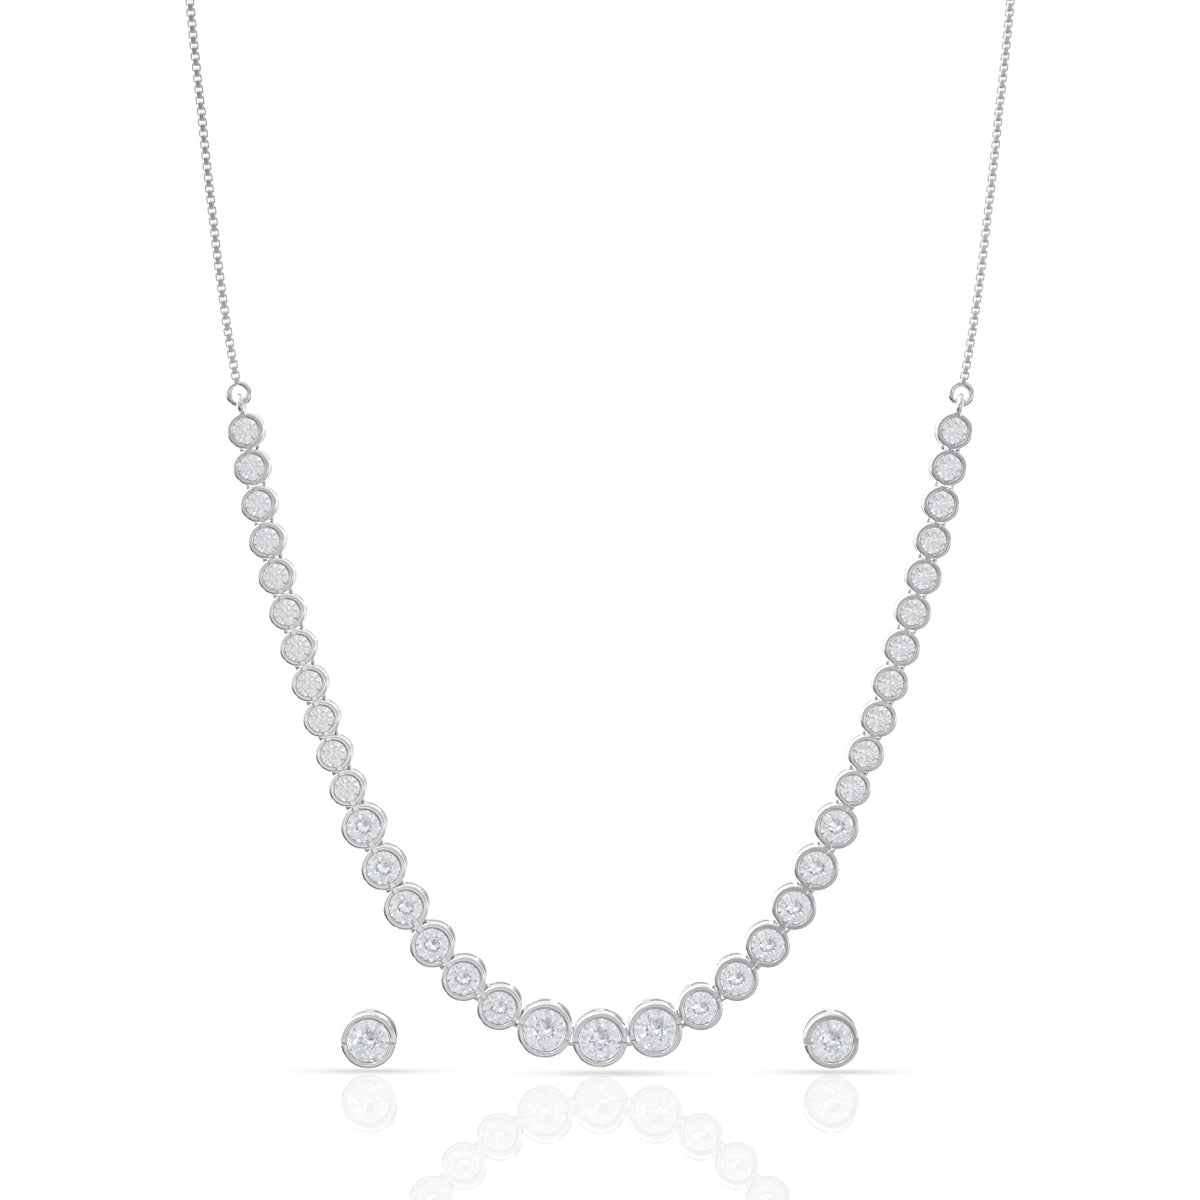 Majestic Solitaire Silver Necklace Set